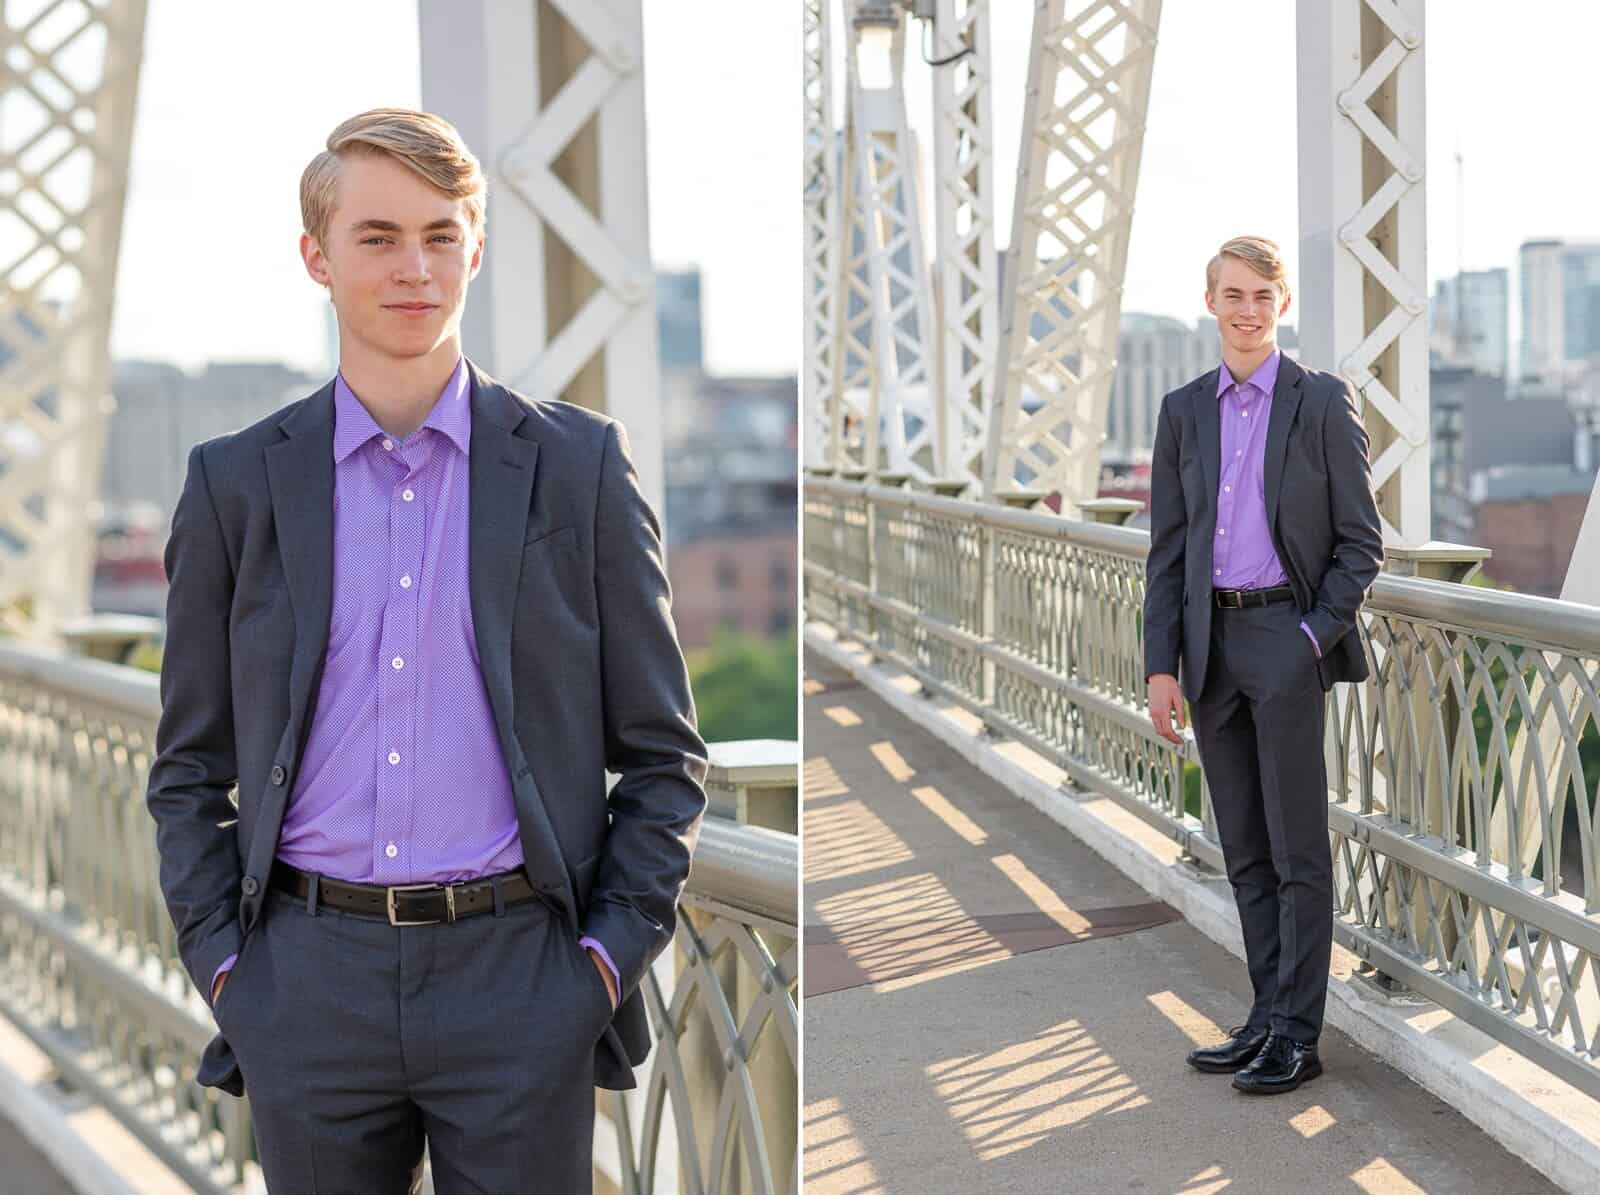 Senior boy with blond hair poses for portraits in gray suit and purple shirt on bridge